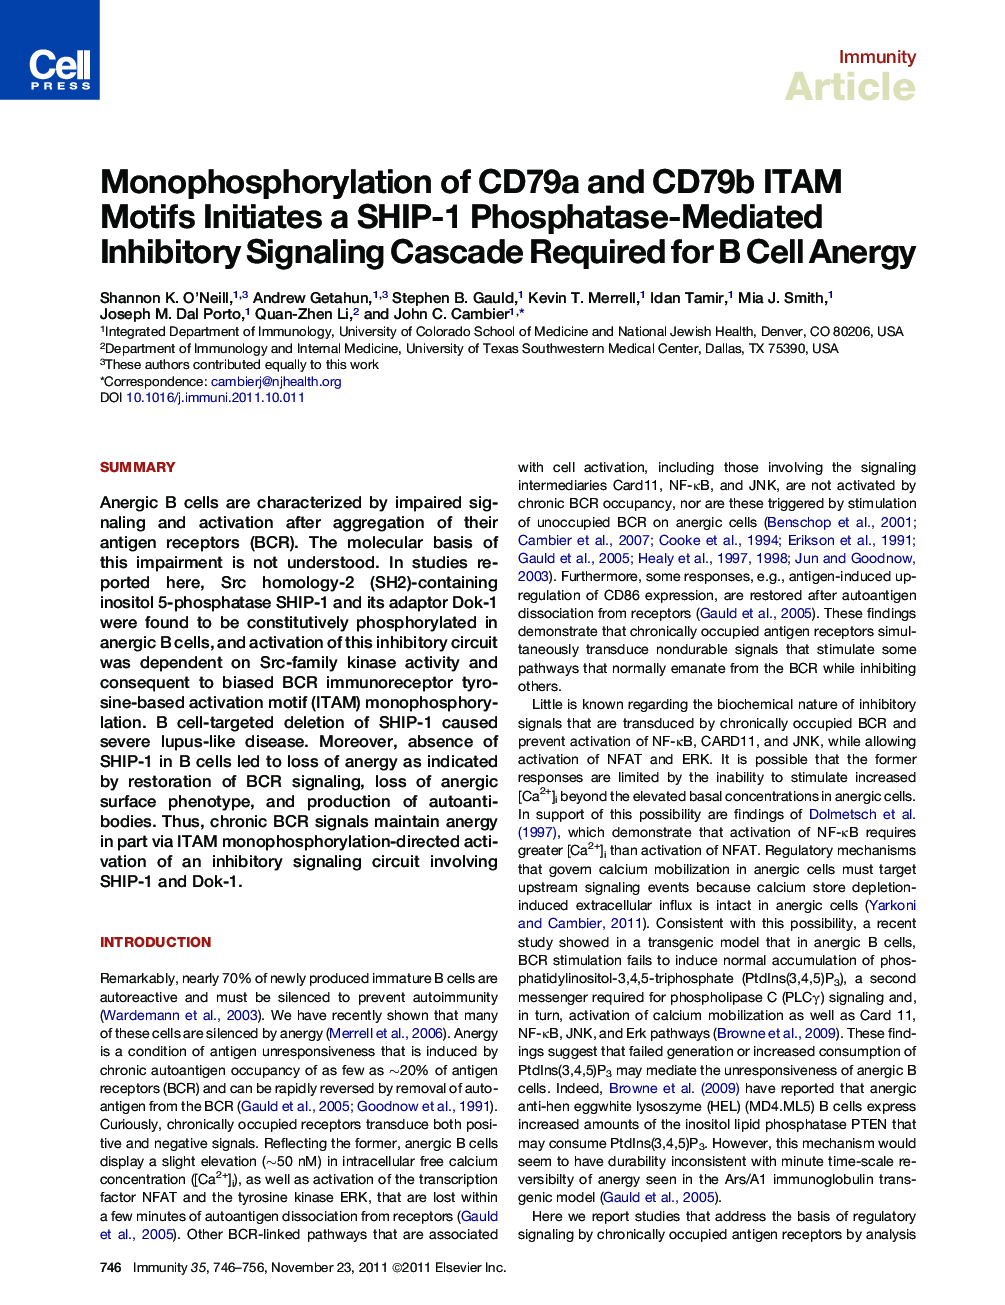 Monophosphorylation of CD79a and CD79b ITAM Motifs Initiates a SHIP-1 Phosphatase-Mediated Inhibitory Signaling Cascade Required for B Cell Anergy